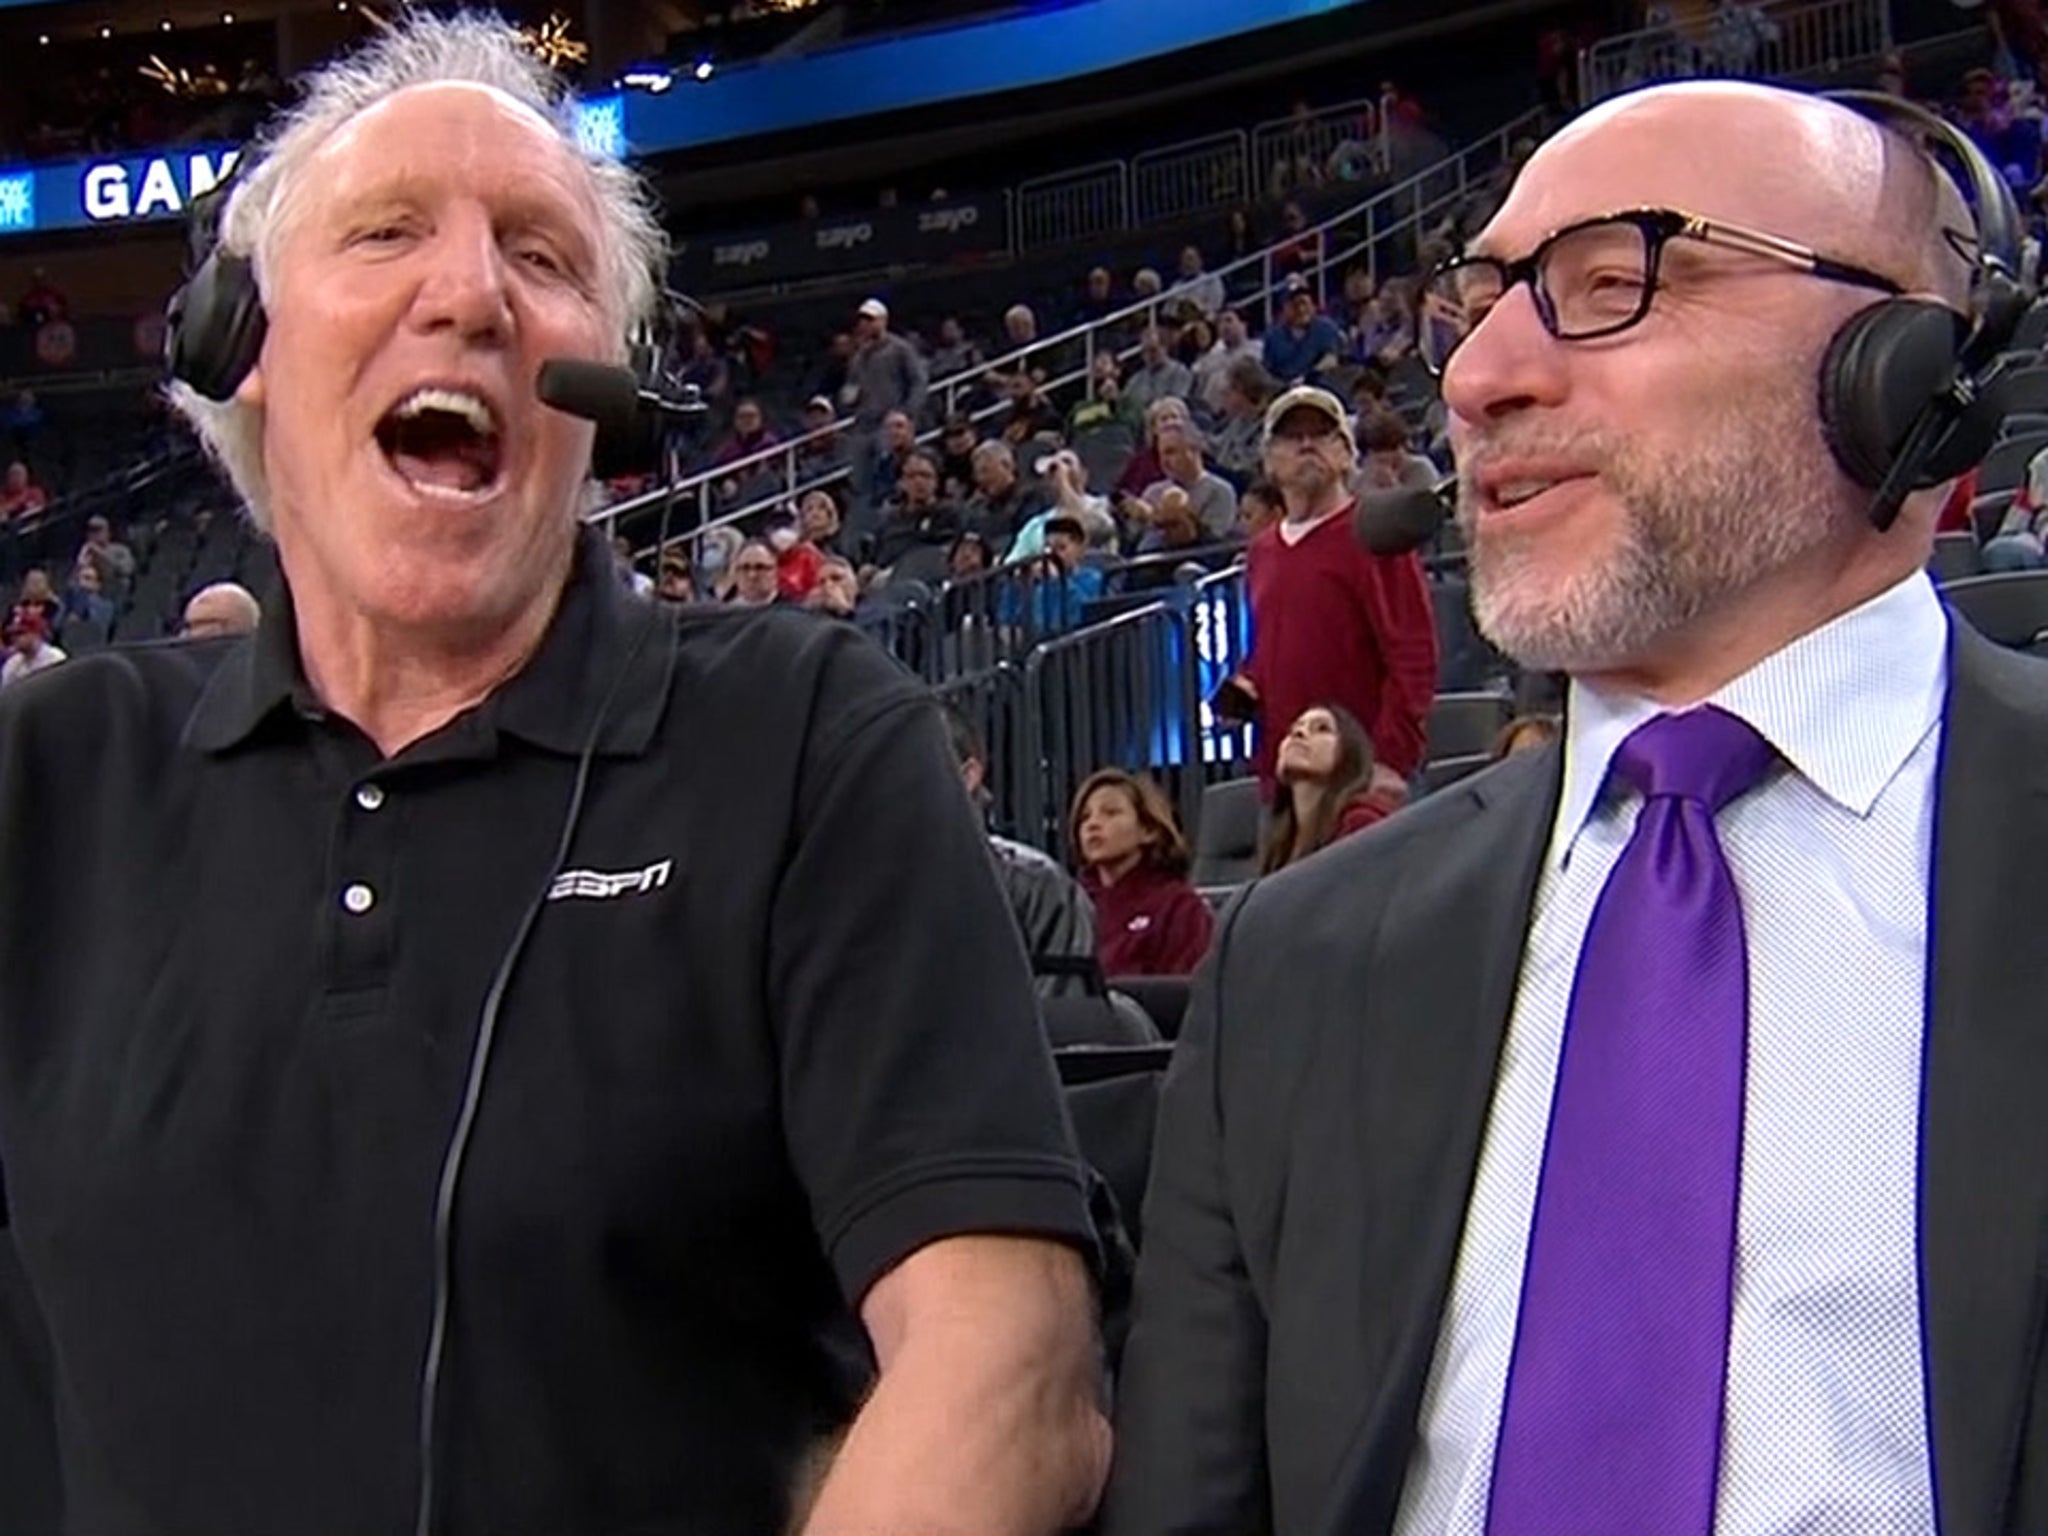 Bill Walton changed his T-shirt in the middle of an ESPN broadcast